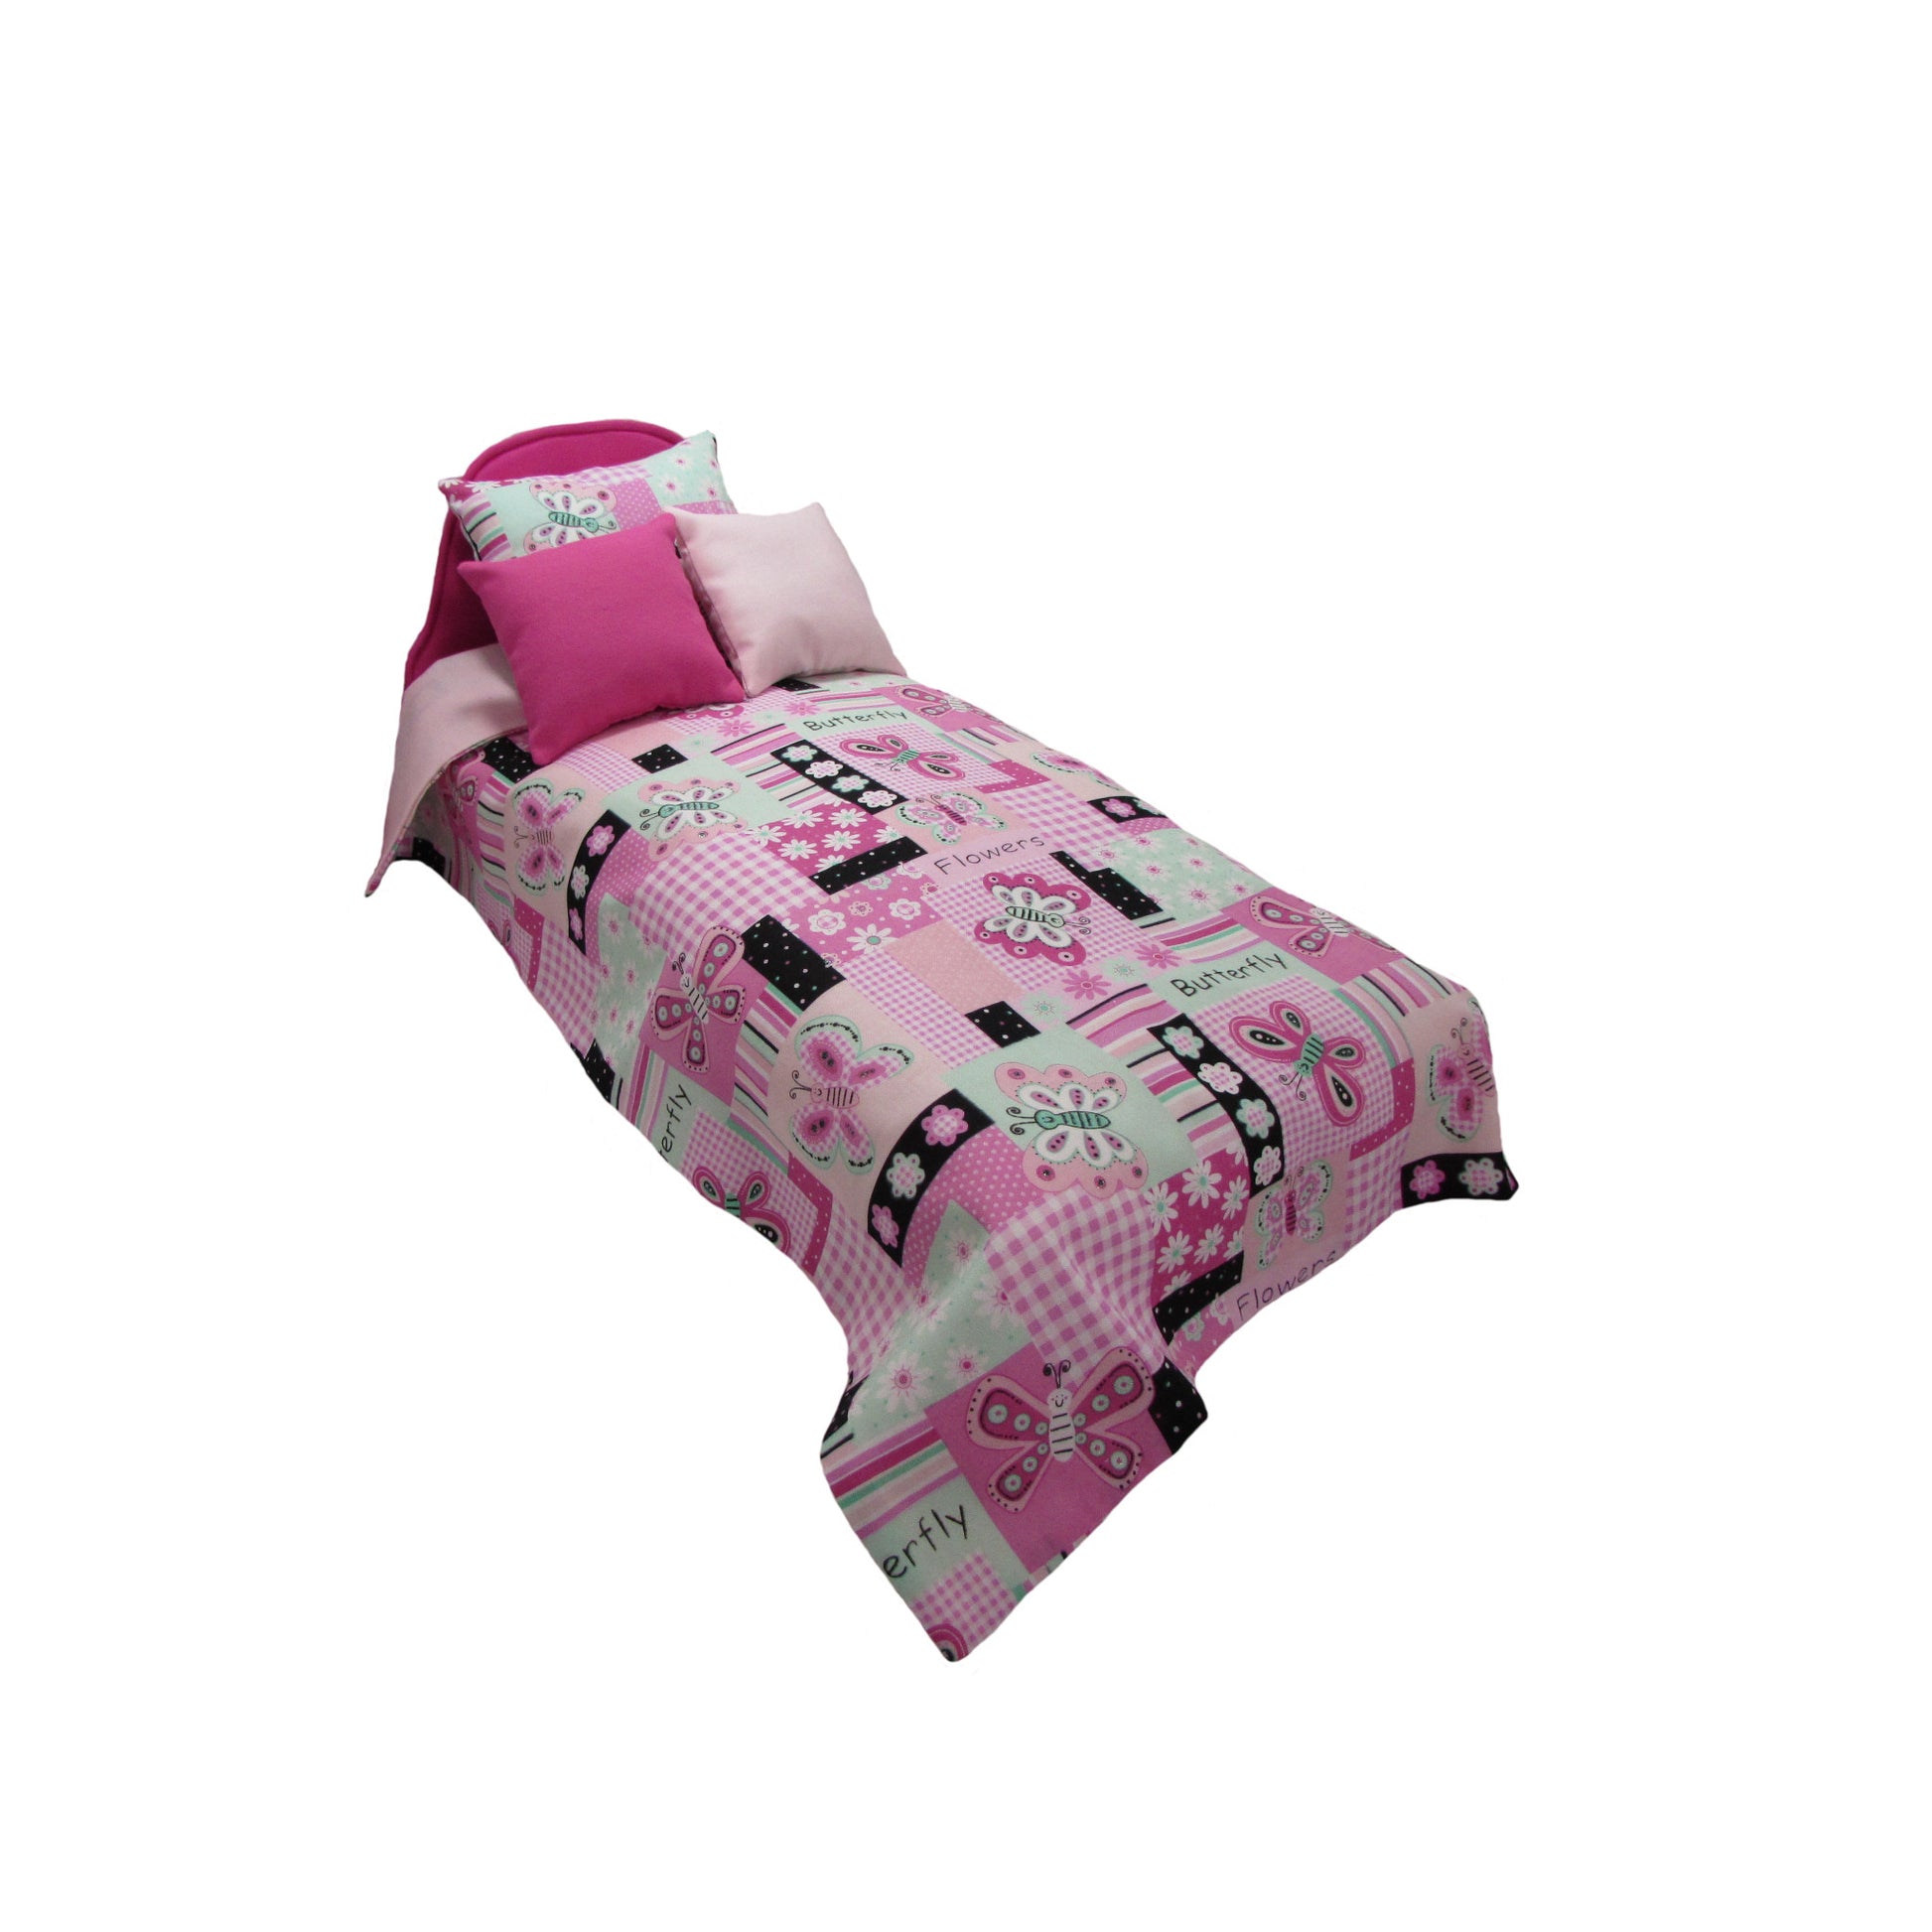 Upholstered Bright Pink Doll Bed and Patchwork Print Doll Bed Bedding for 14.5-inch dolls